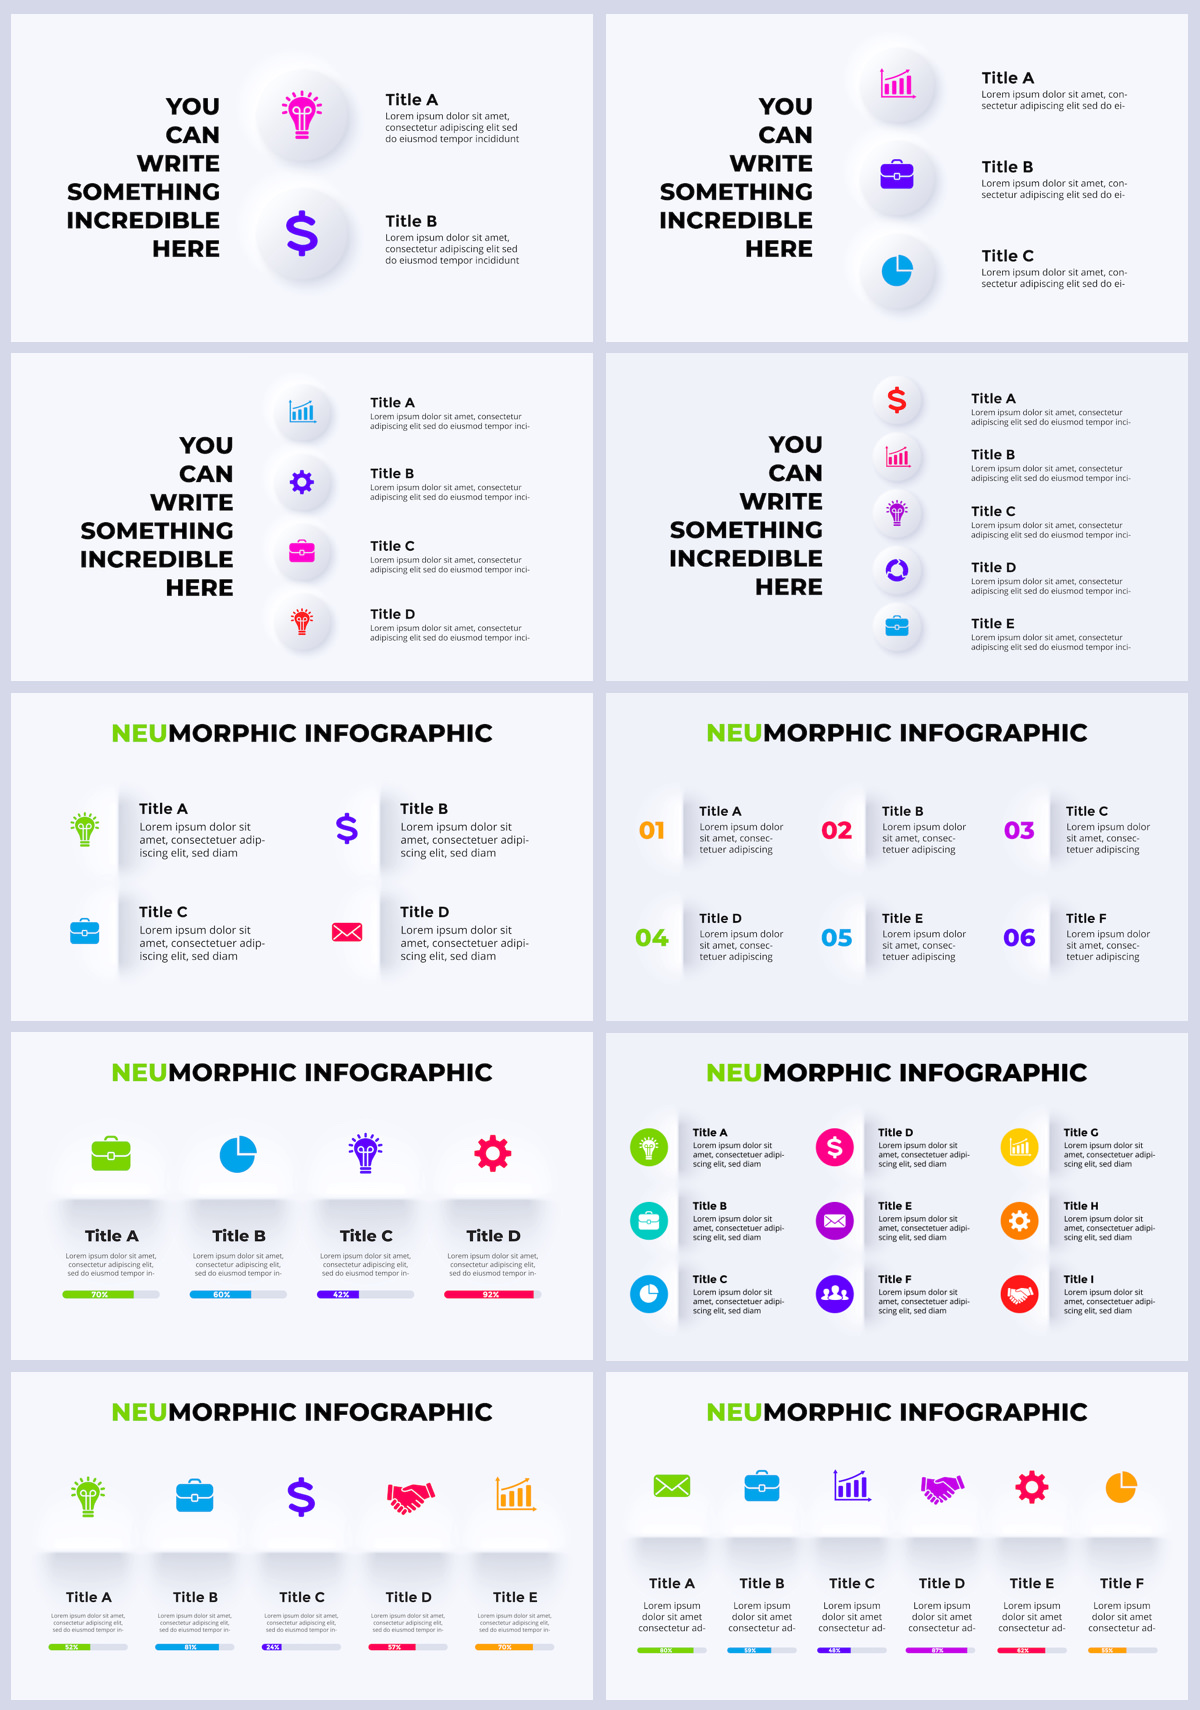 Wowly - 3500 Infographics & Presentation Templates! Updated! PowerPoint Canva Figma Sketch Ai Psd. - 325